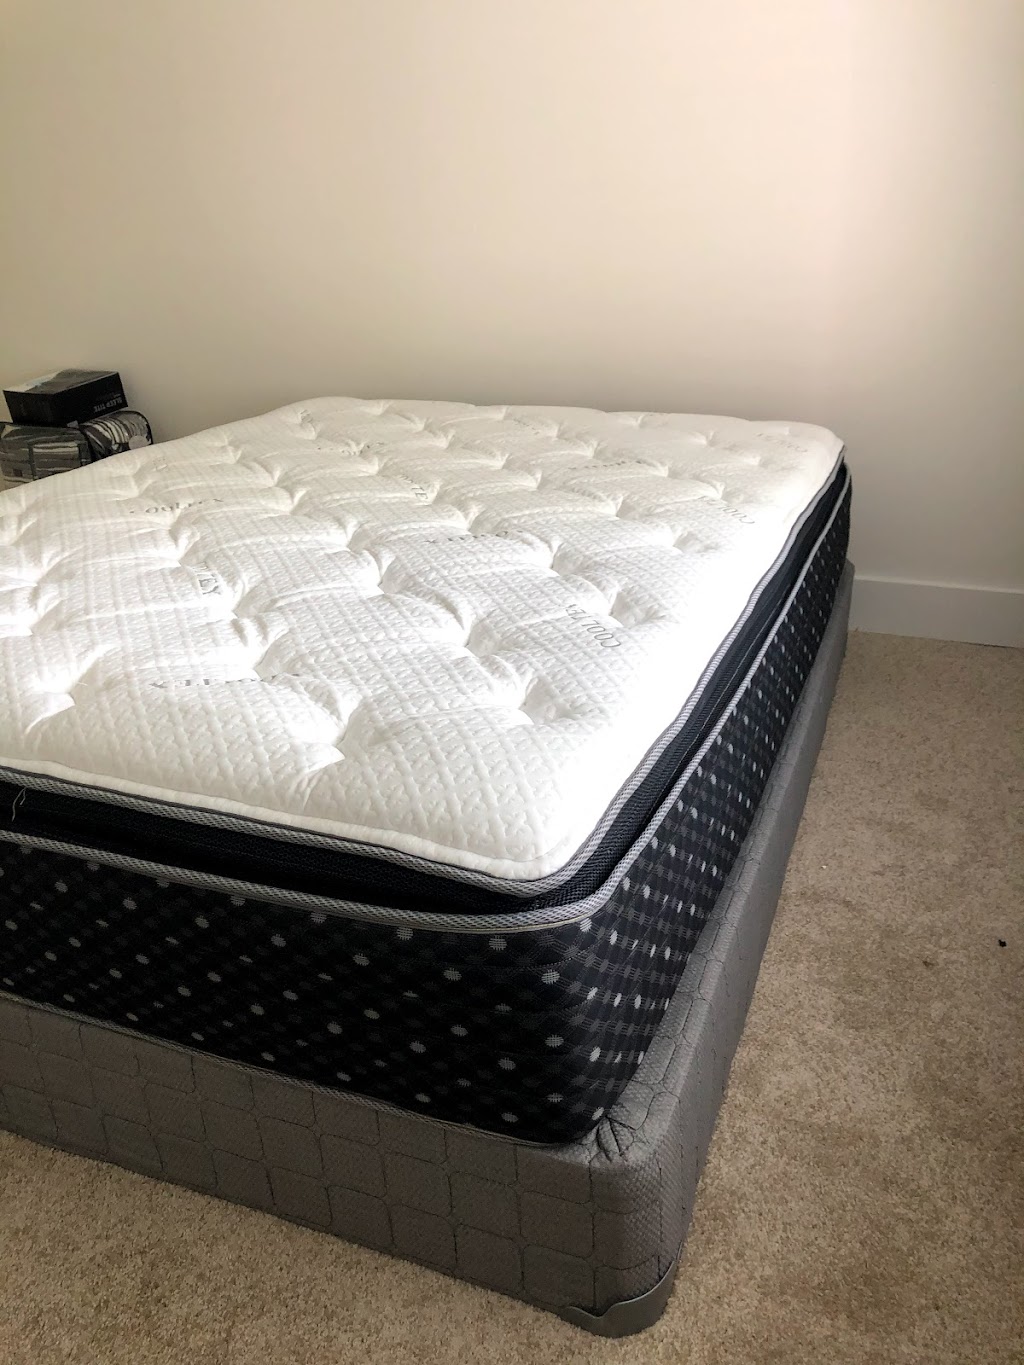 Mattress By Appointment, Dallas GA | 835 Charles Hardy Pkwy Suit A, Dallas, GA 30157, USA | Phone: (770) 262-8284